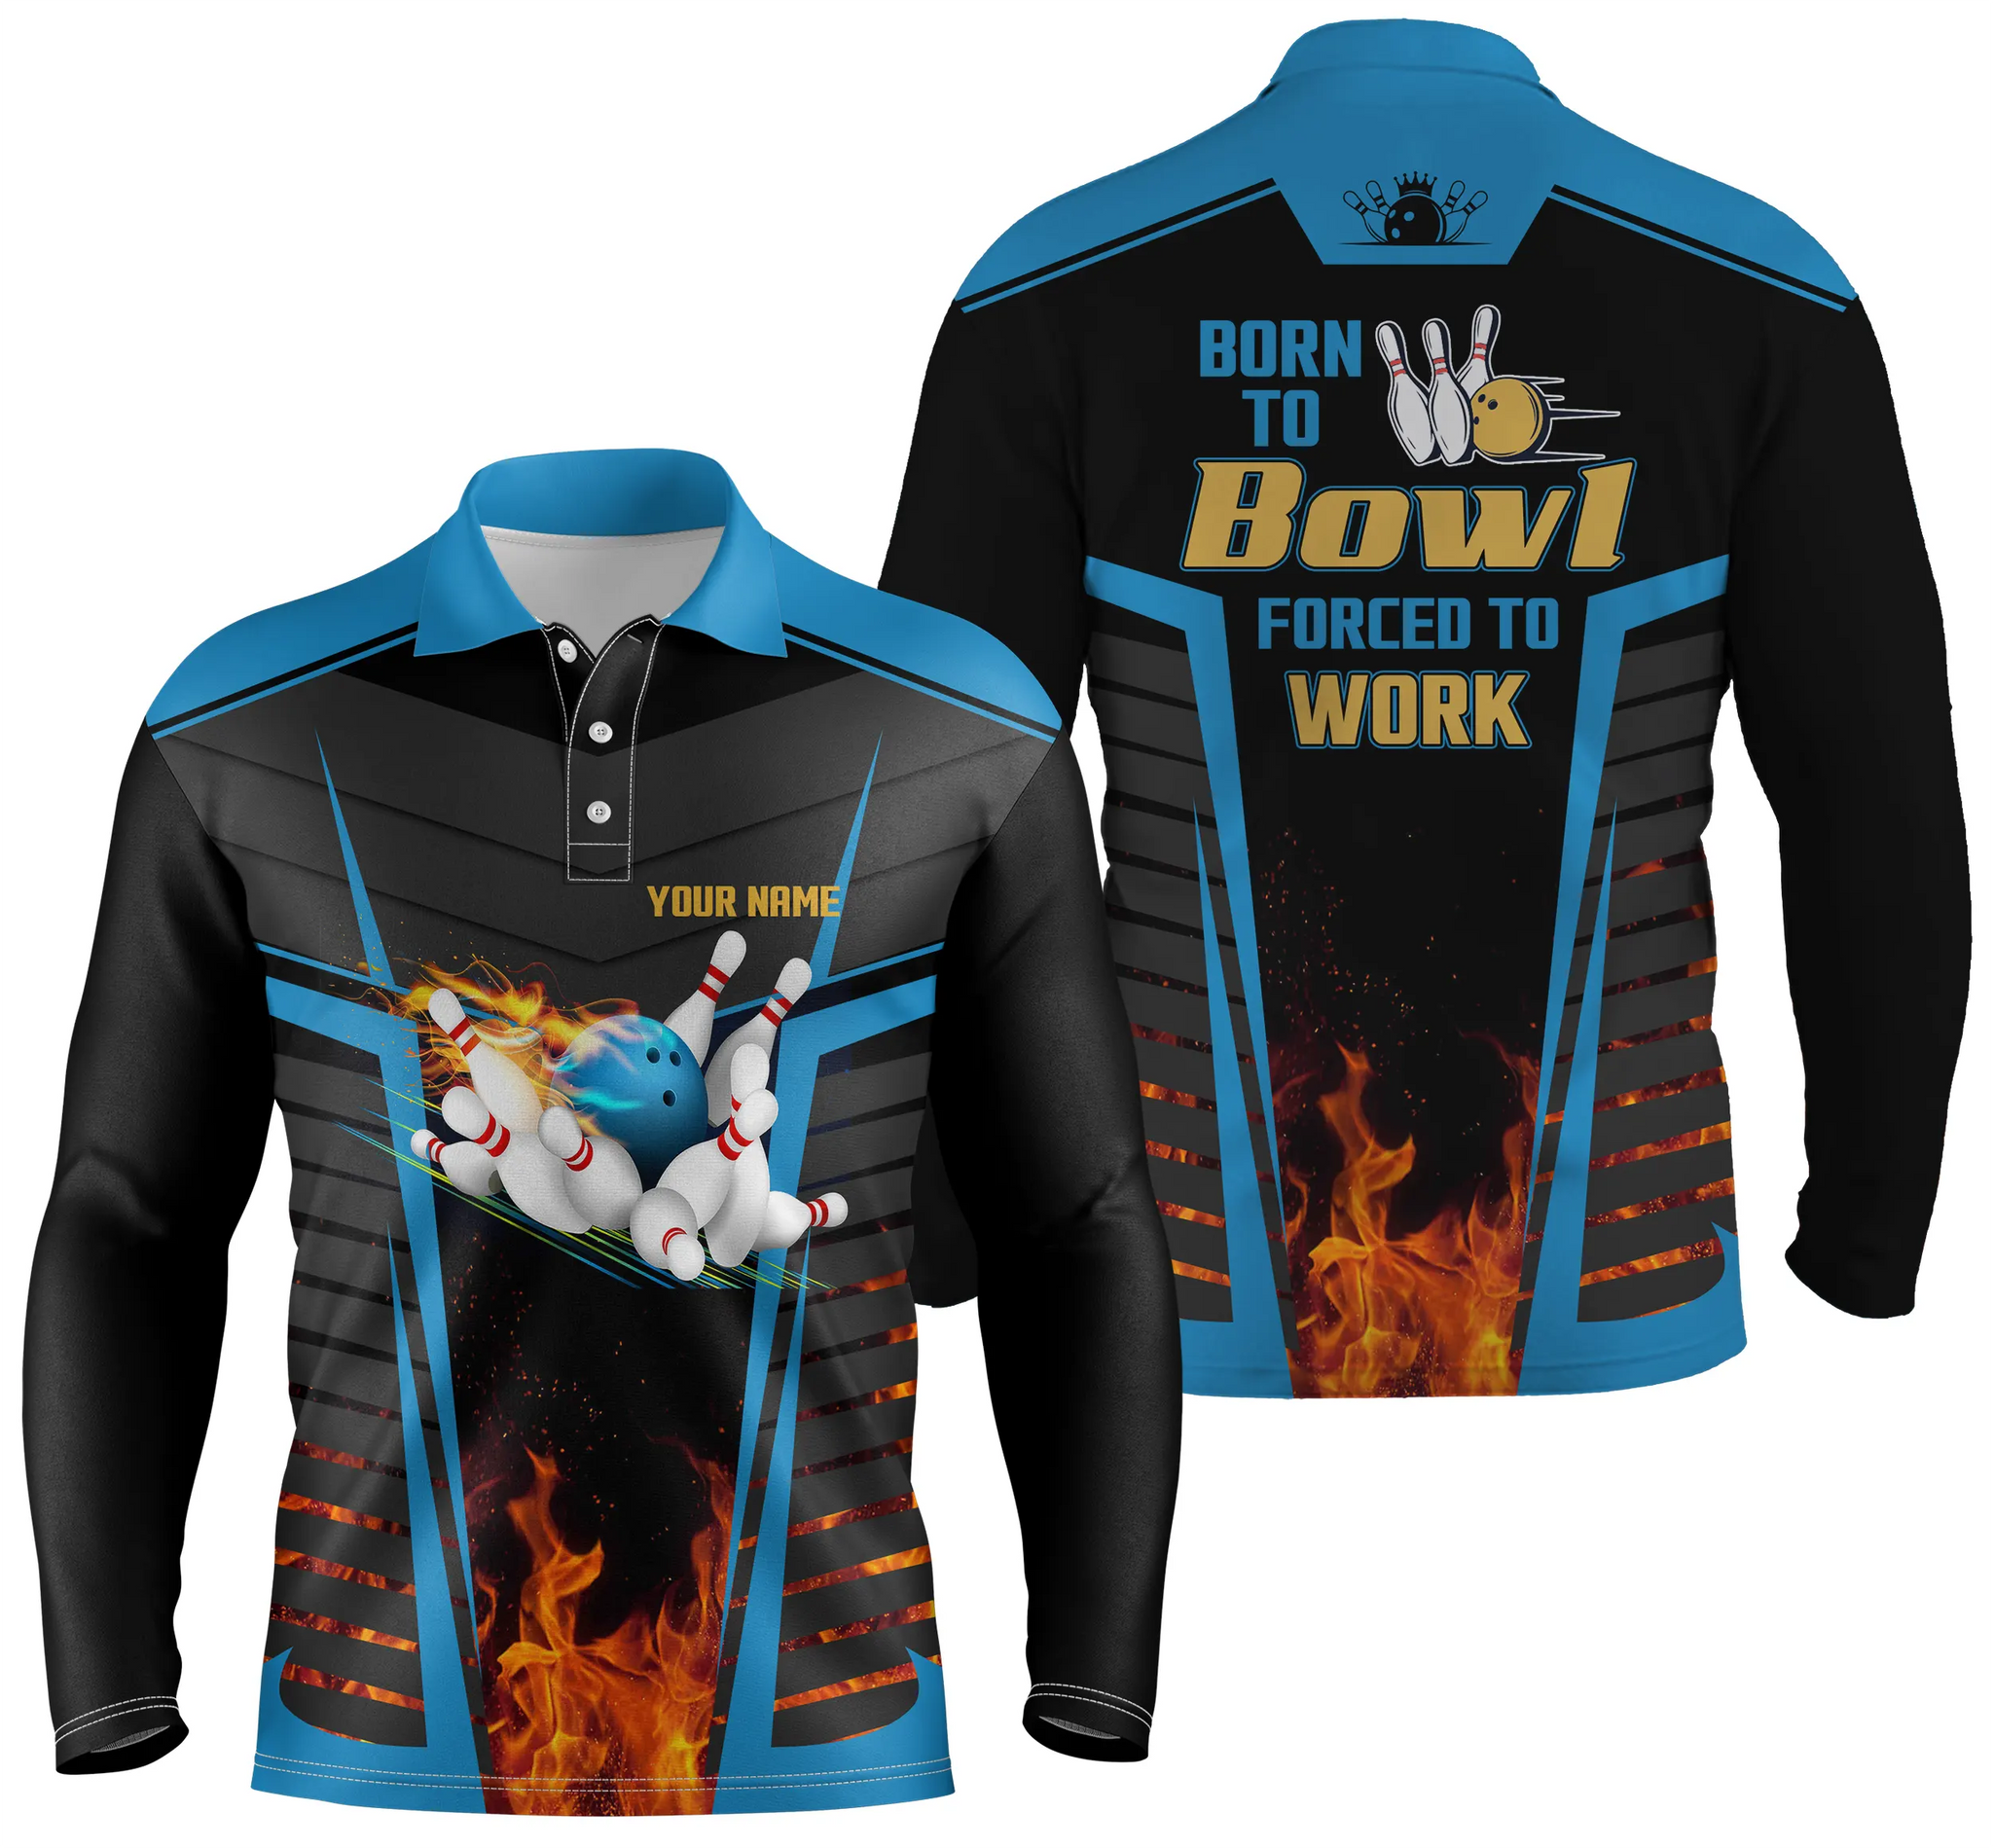 Men''s Bowling Long Sleeve Polo Shirts Custom Name Born To Bowl Forced To Work/ Flame Bowlers Jersey